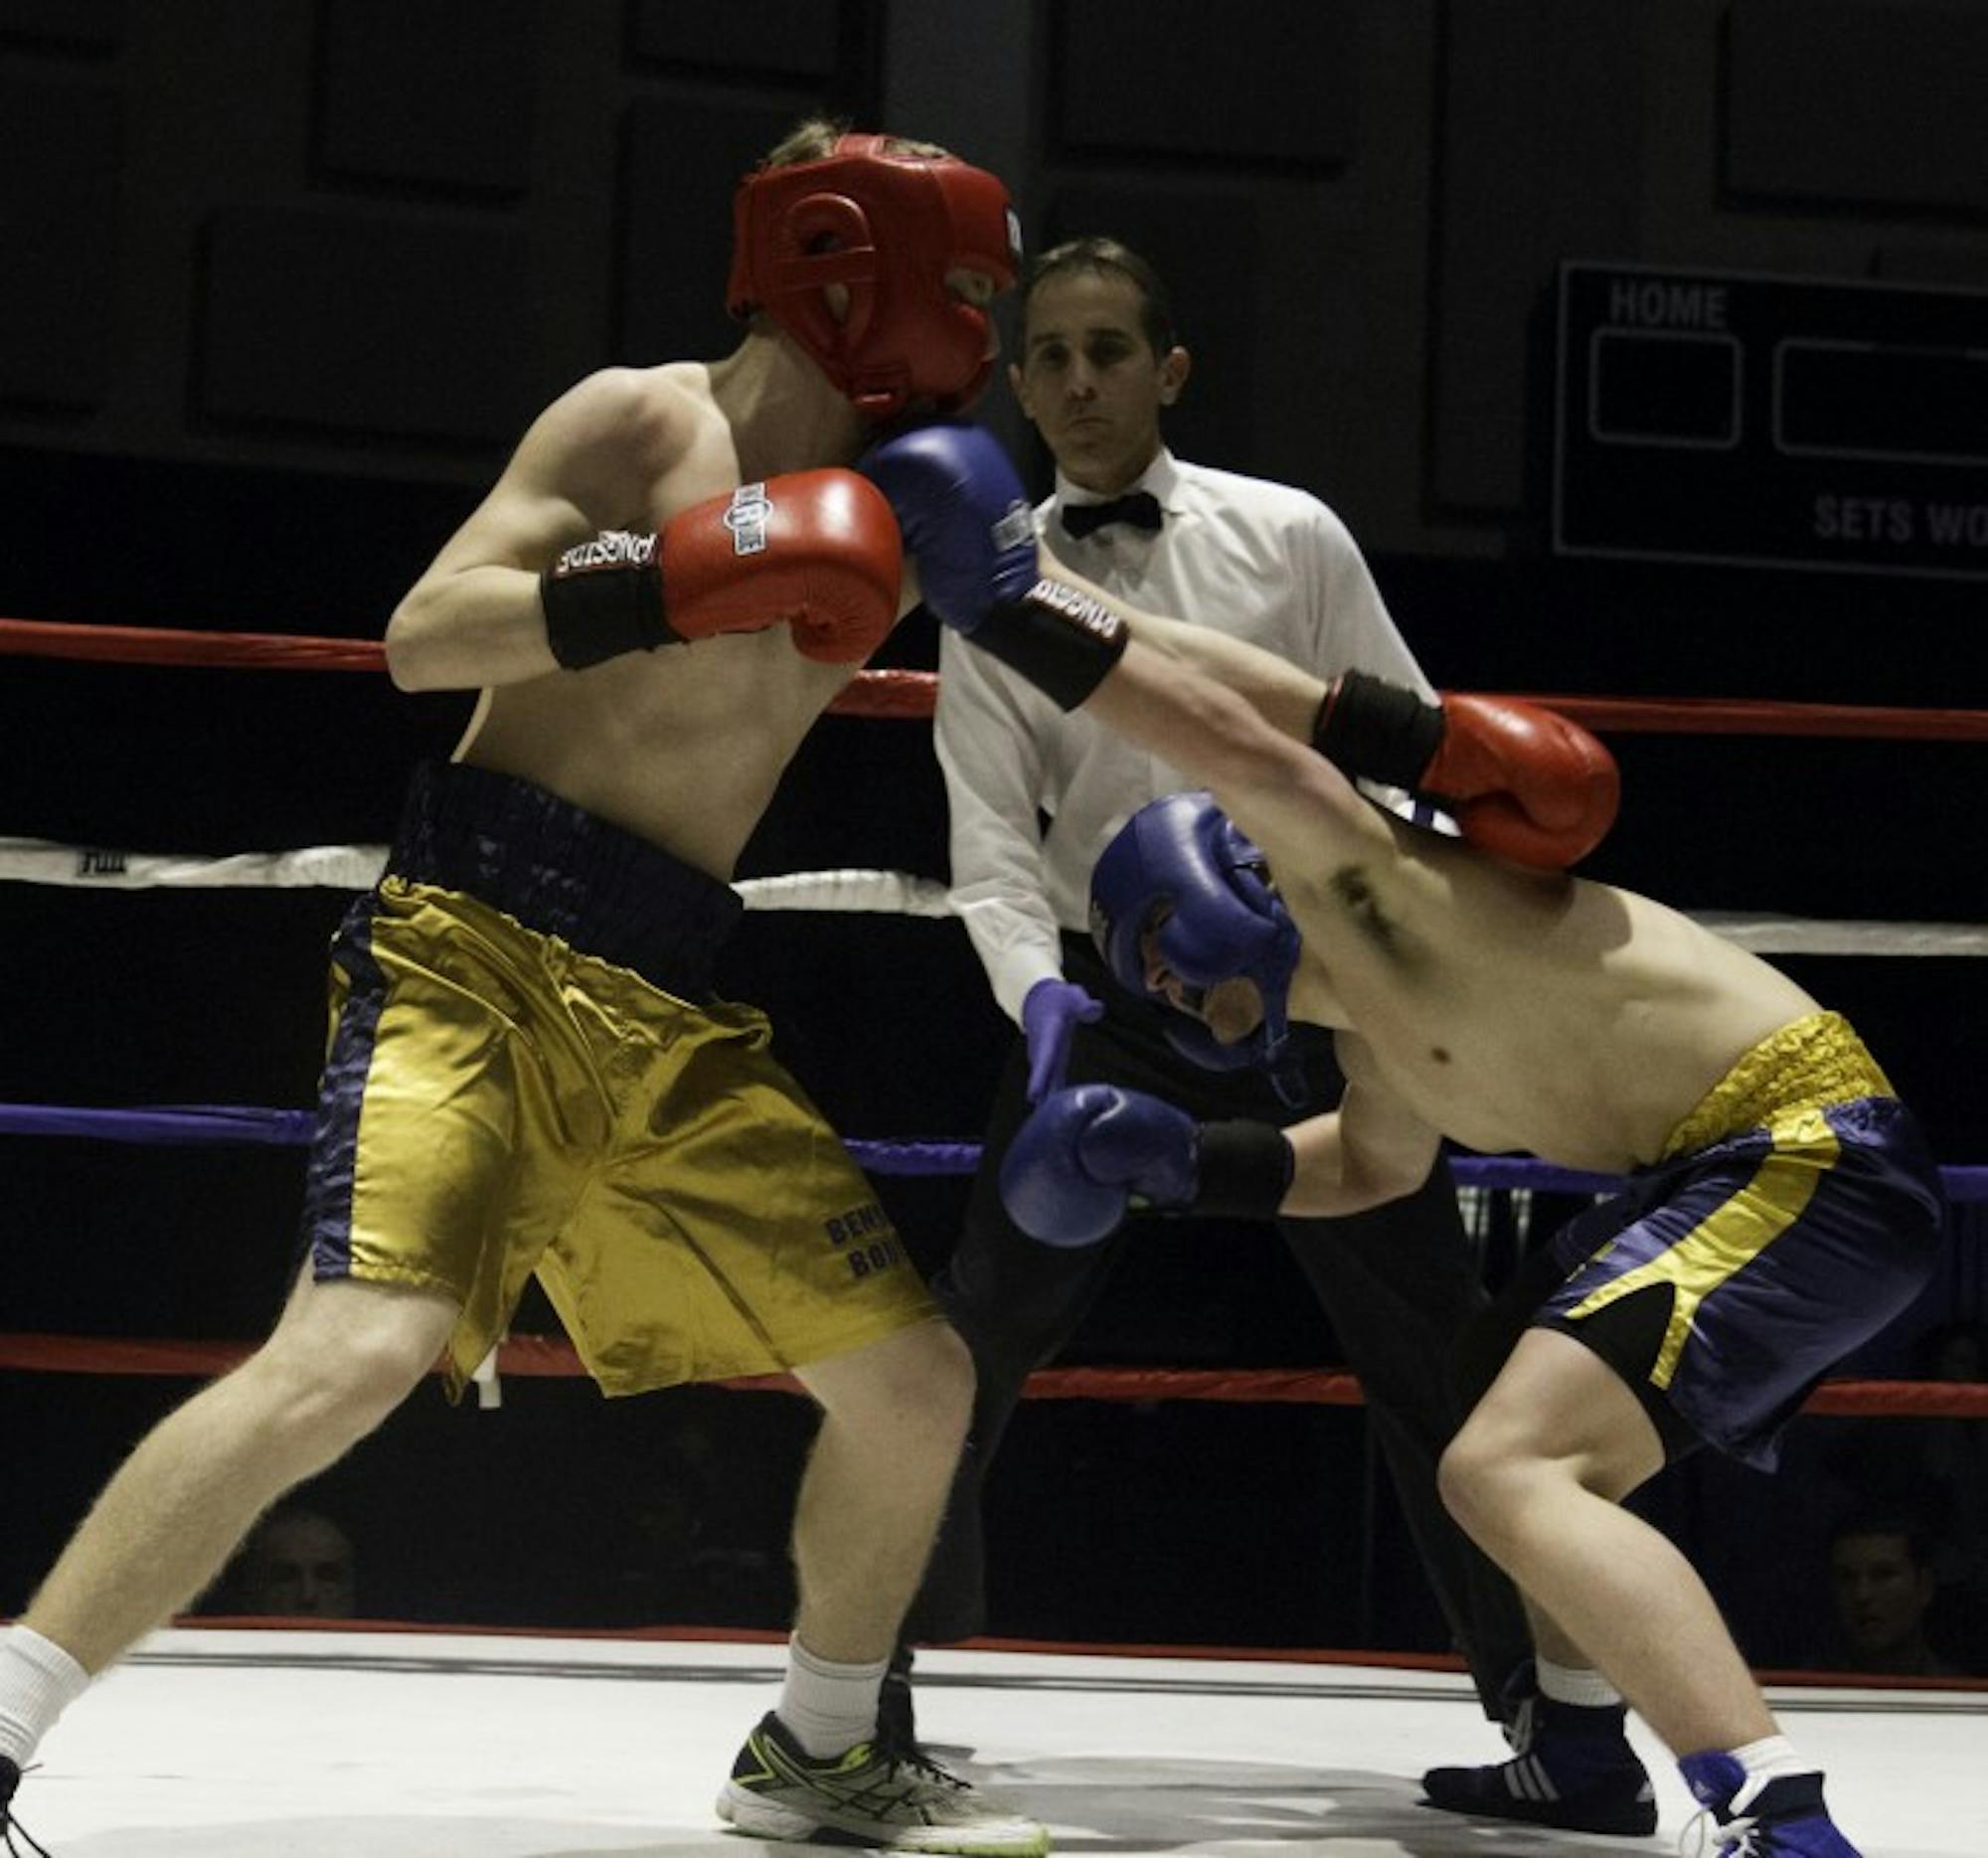 Freshman Jonny Biagini, right, ducks to avoid a punch from freshman Ian Salzman during the prelimary round of the 87th annual Bengal Bouts tournament on Tuesday at the Joyce Athletic and Convocation Center.